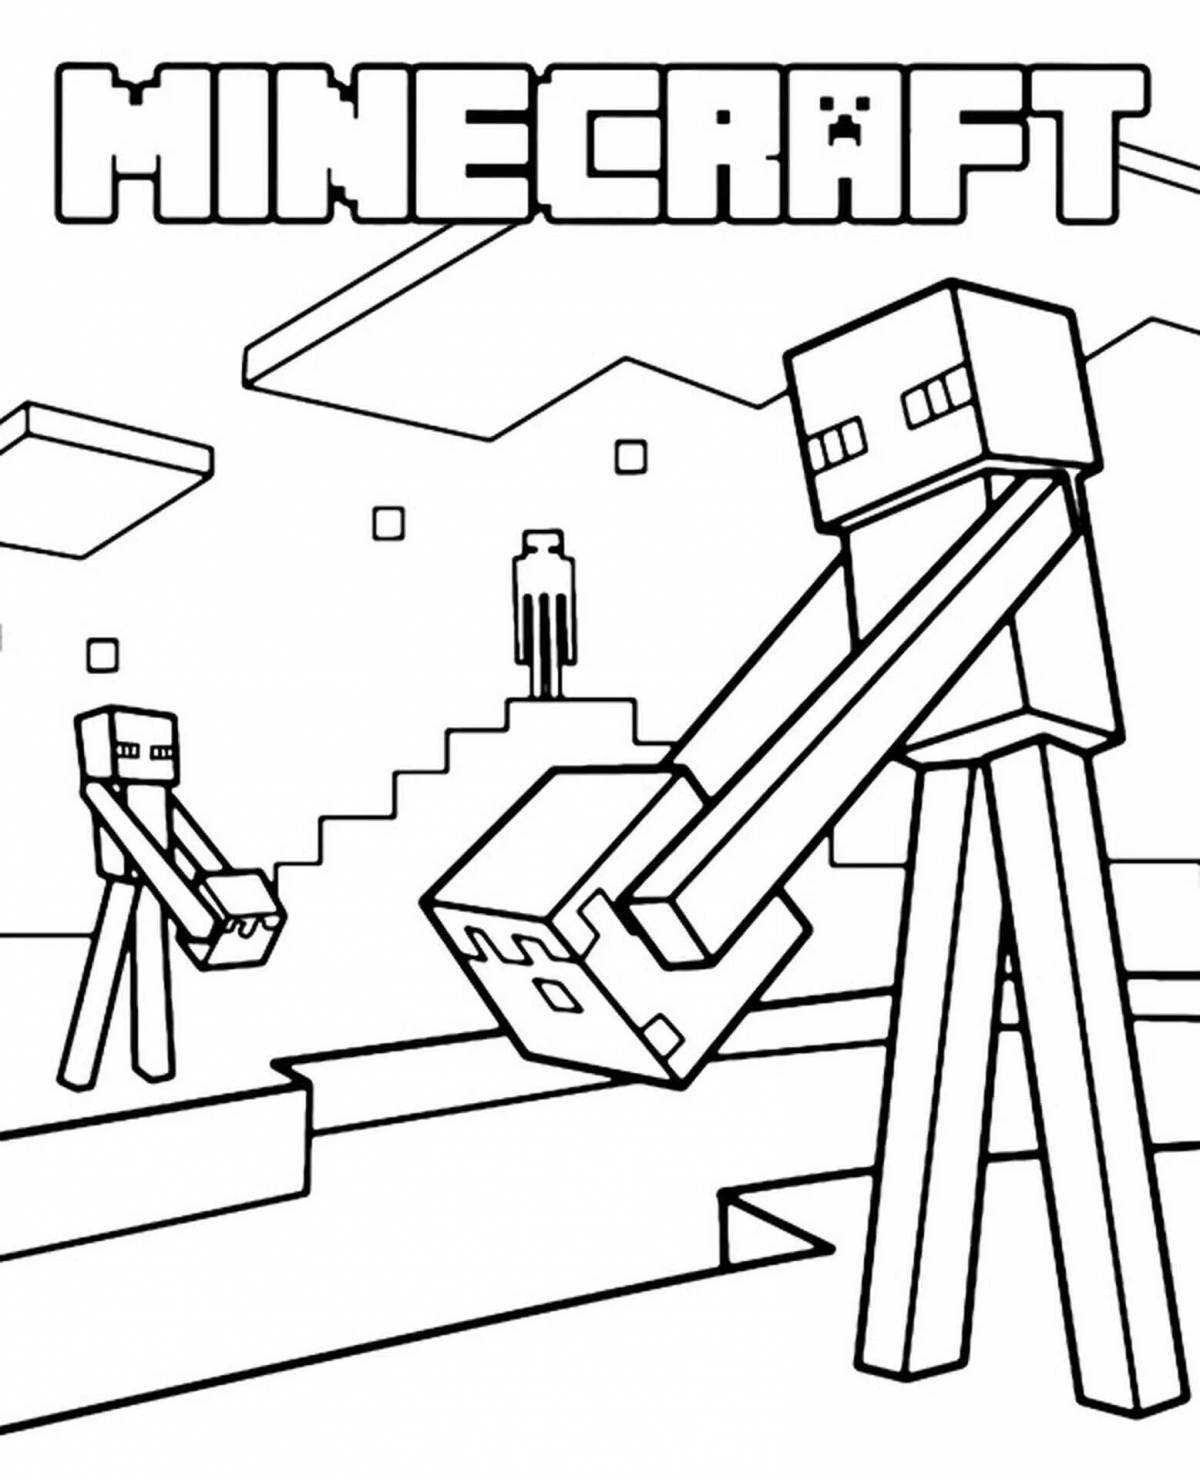 Exciting minecraft style coloring book